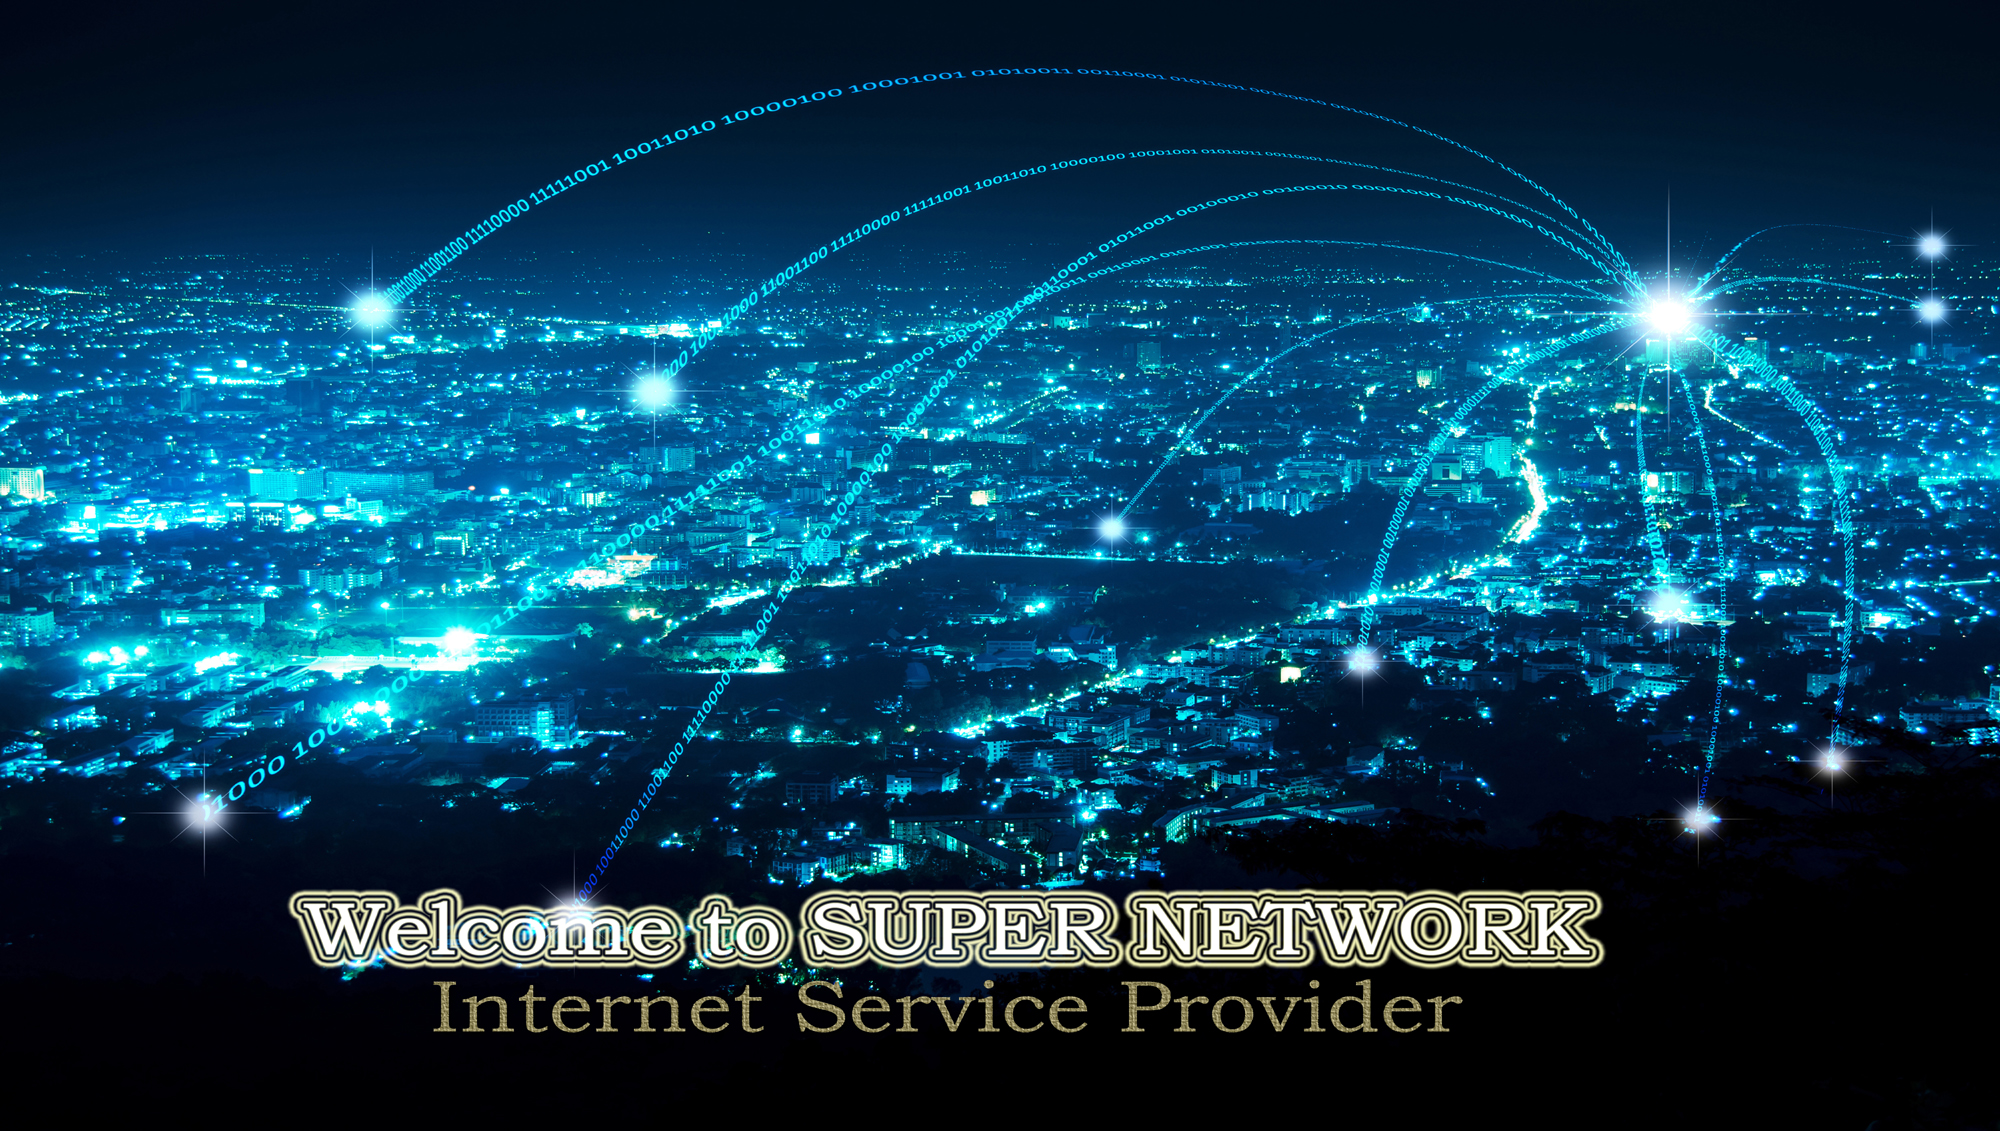 Welcome to SUPER NETWORK